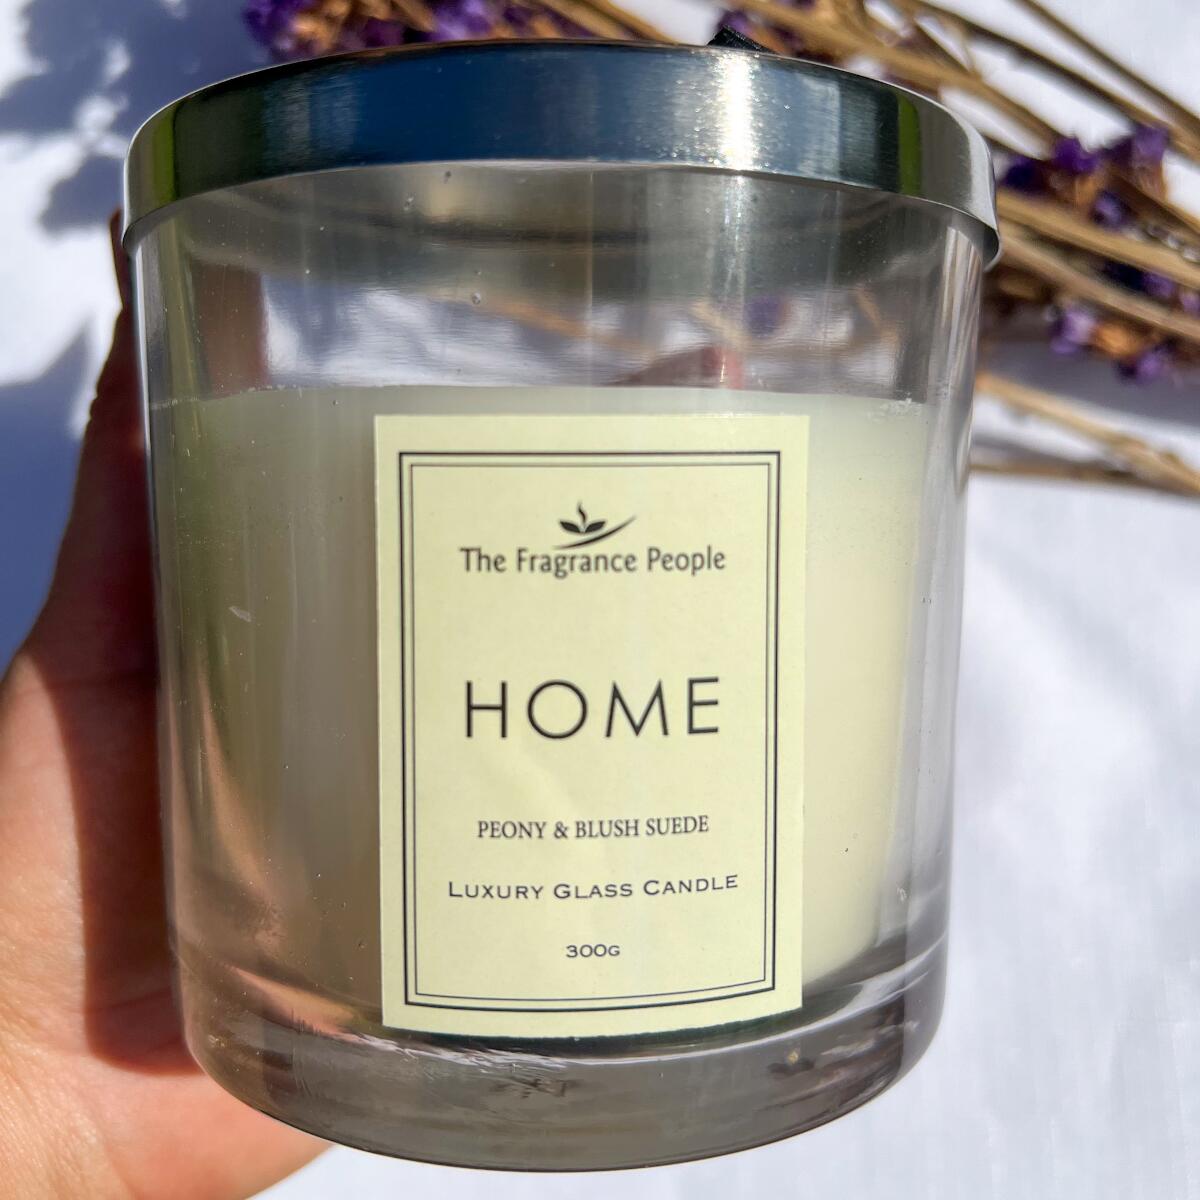 Home Peony & Blush Suede Glass Candle 300g